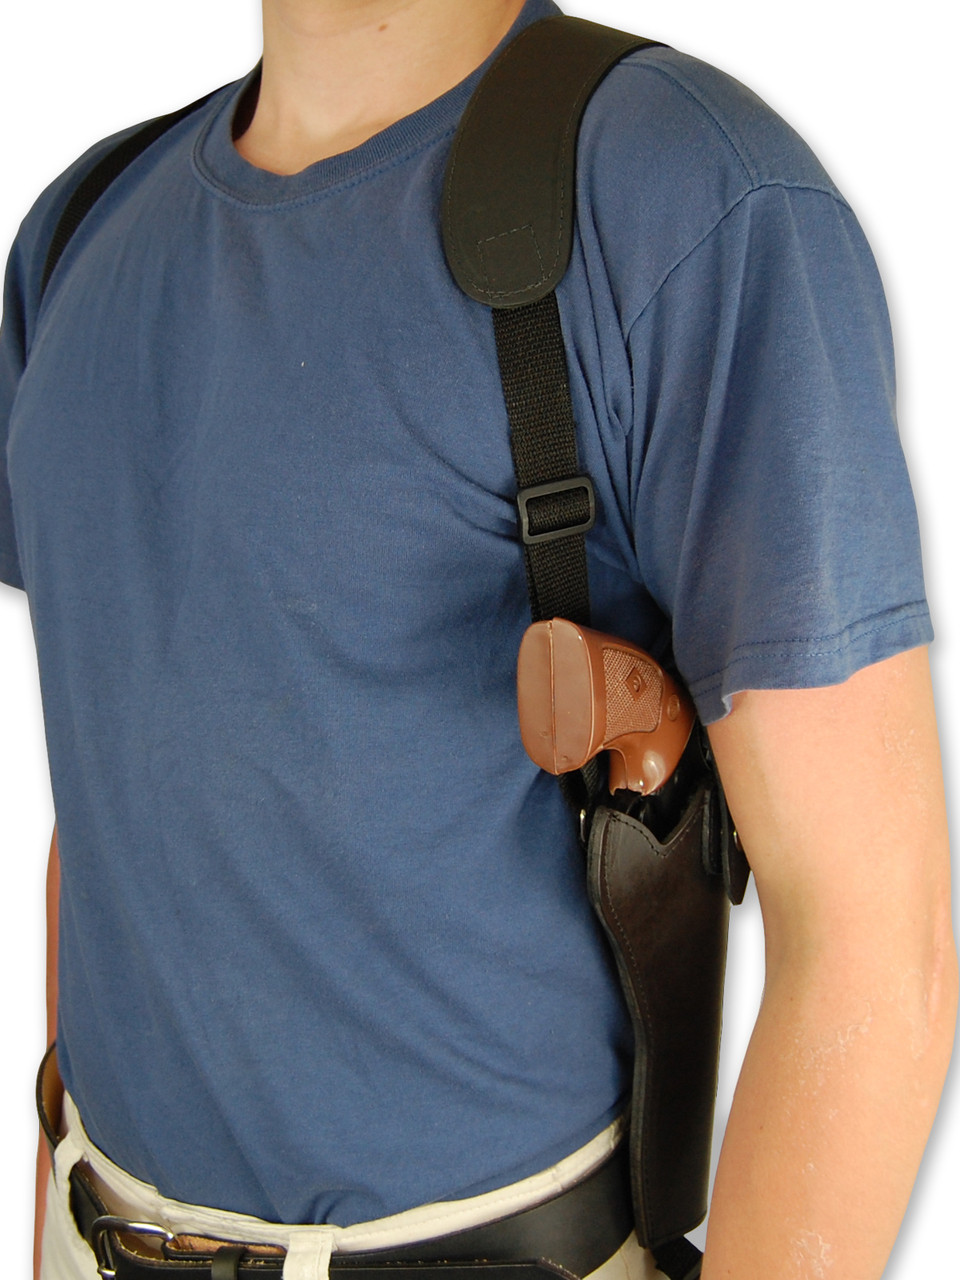 Brown Leather Vertical Shoulder Holster with Speed-loader Pouch for 6-8  Revolvers - Barsony Holsters